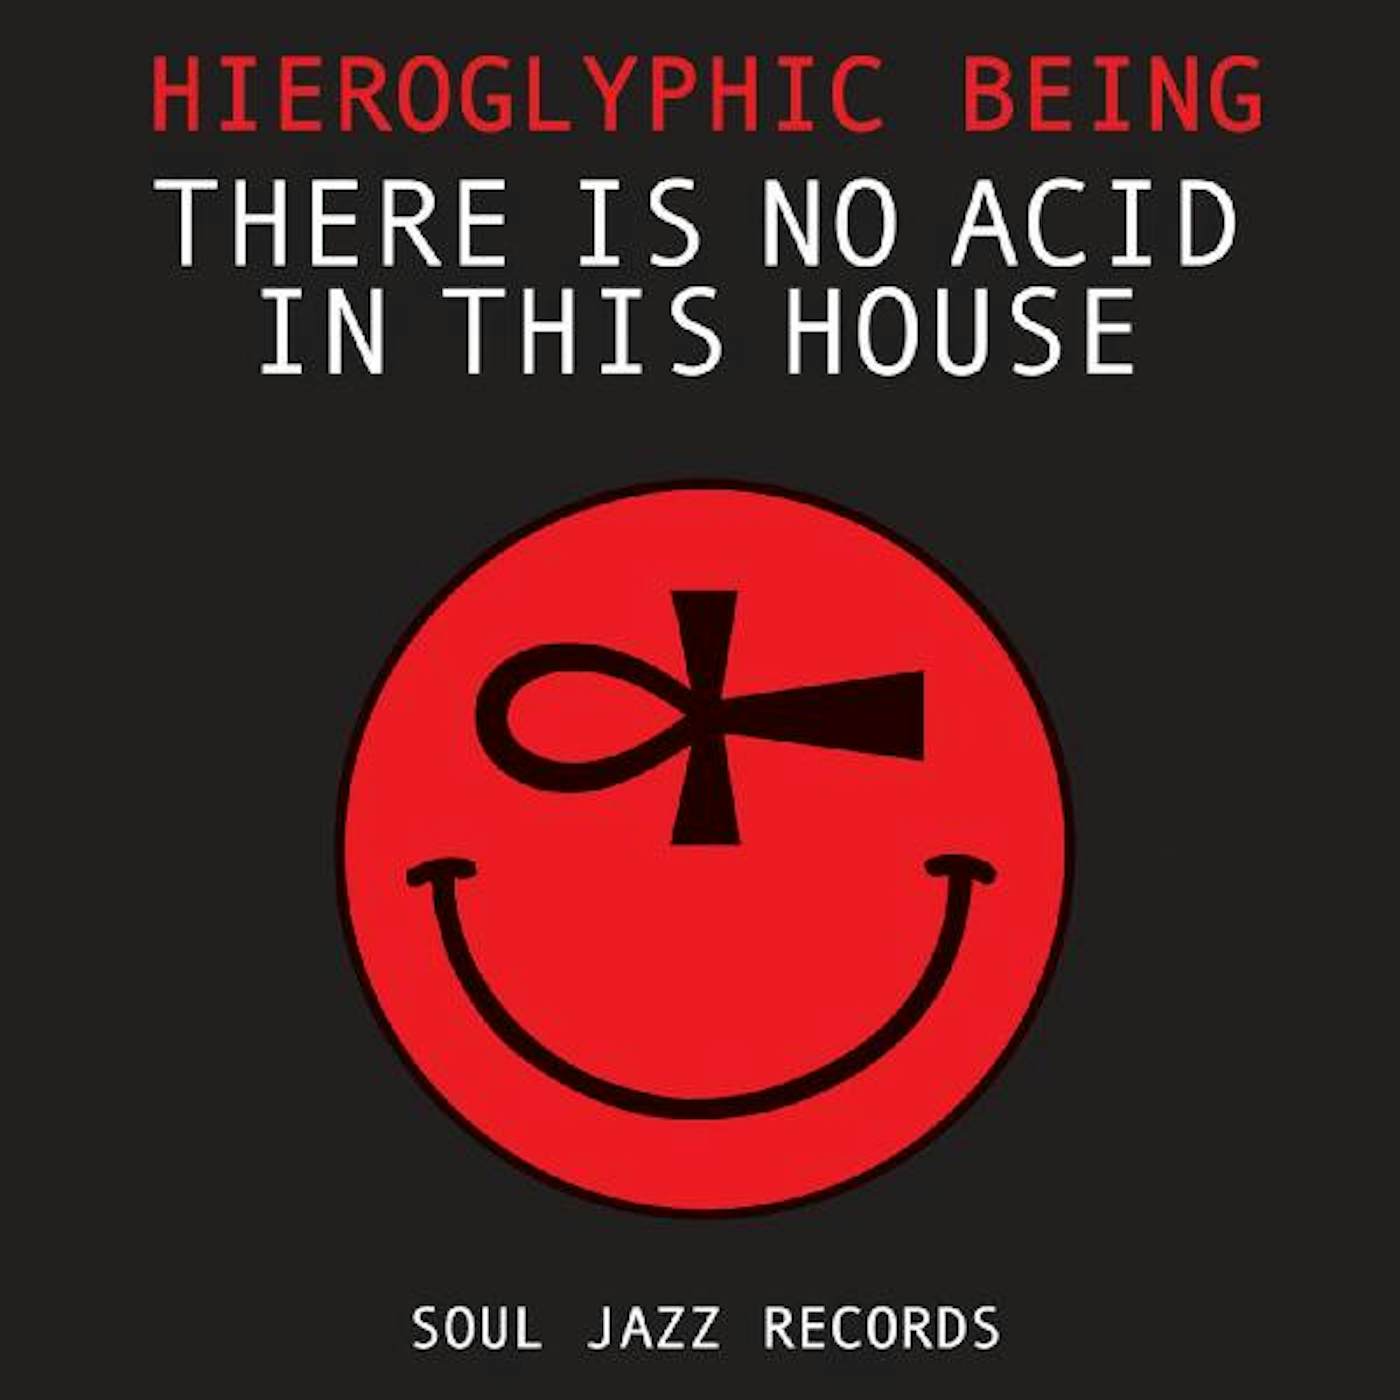 Hieroglyphic Being There Is No Acid In This House CD